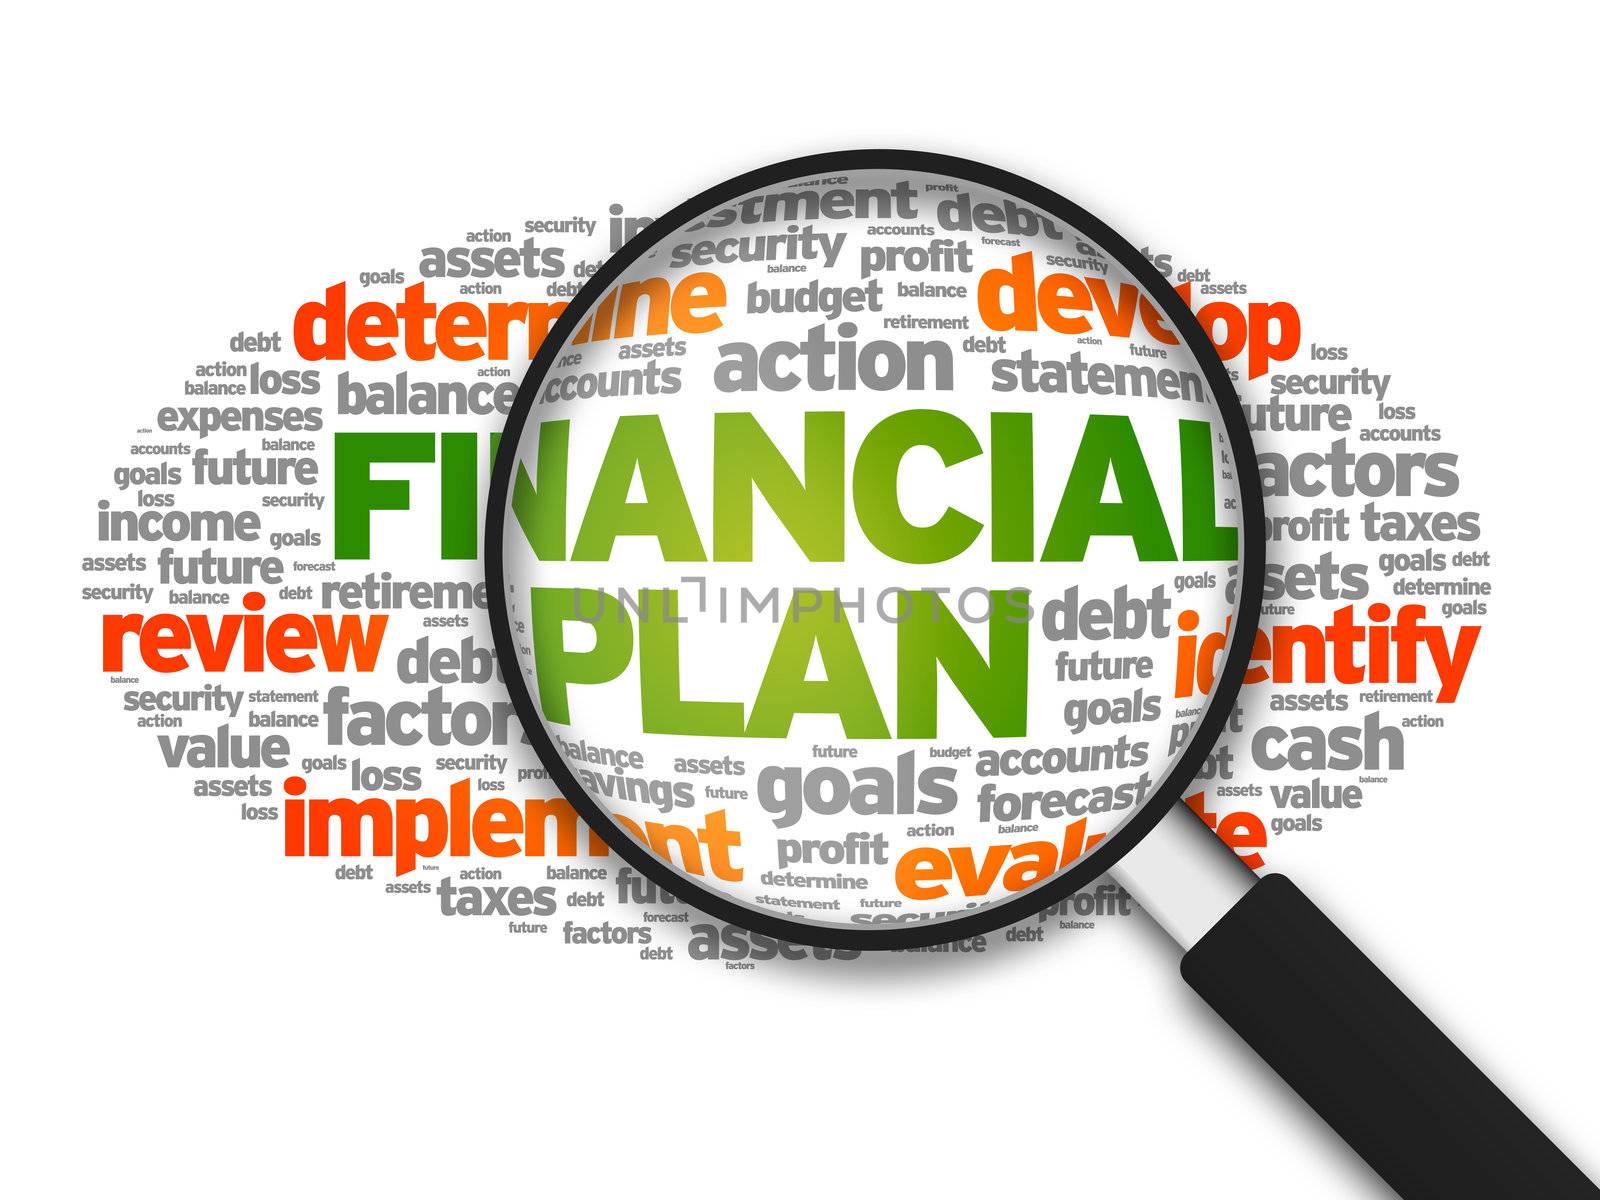 Magnified illustration with the words Financial Plan on white background.